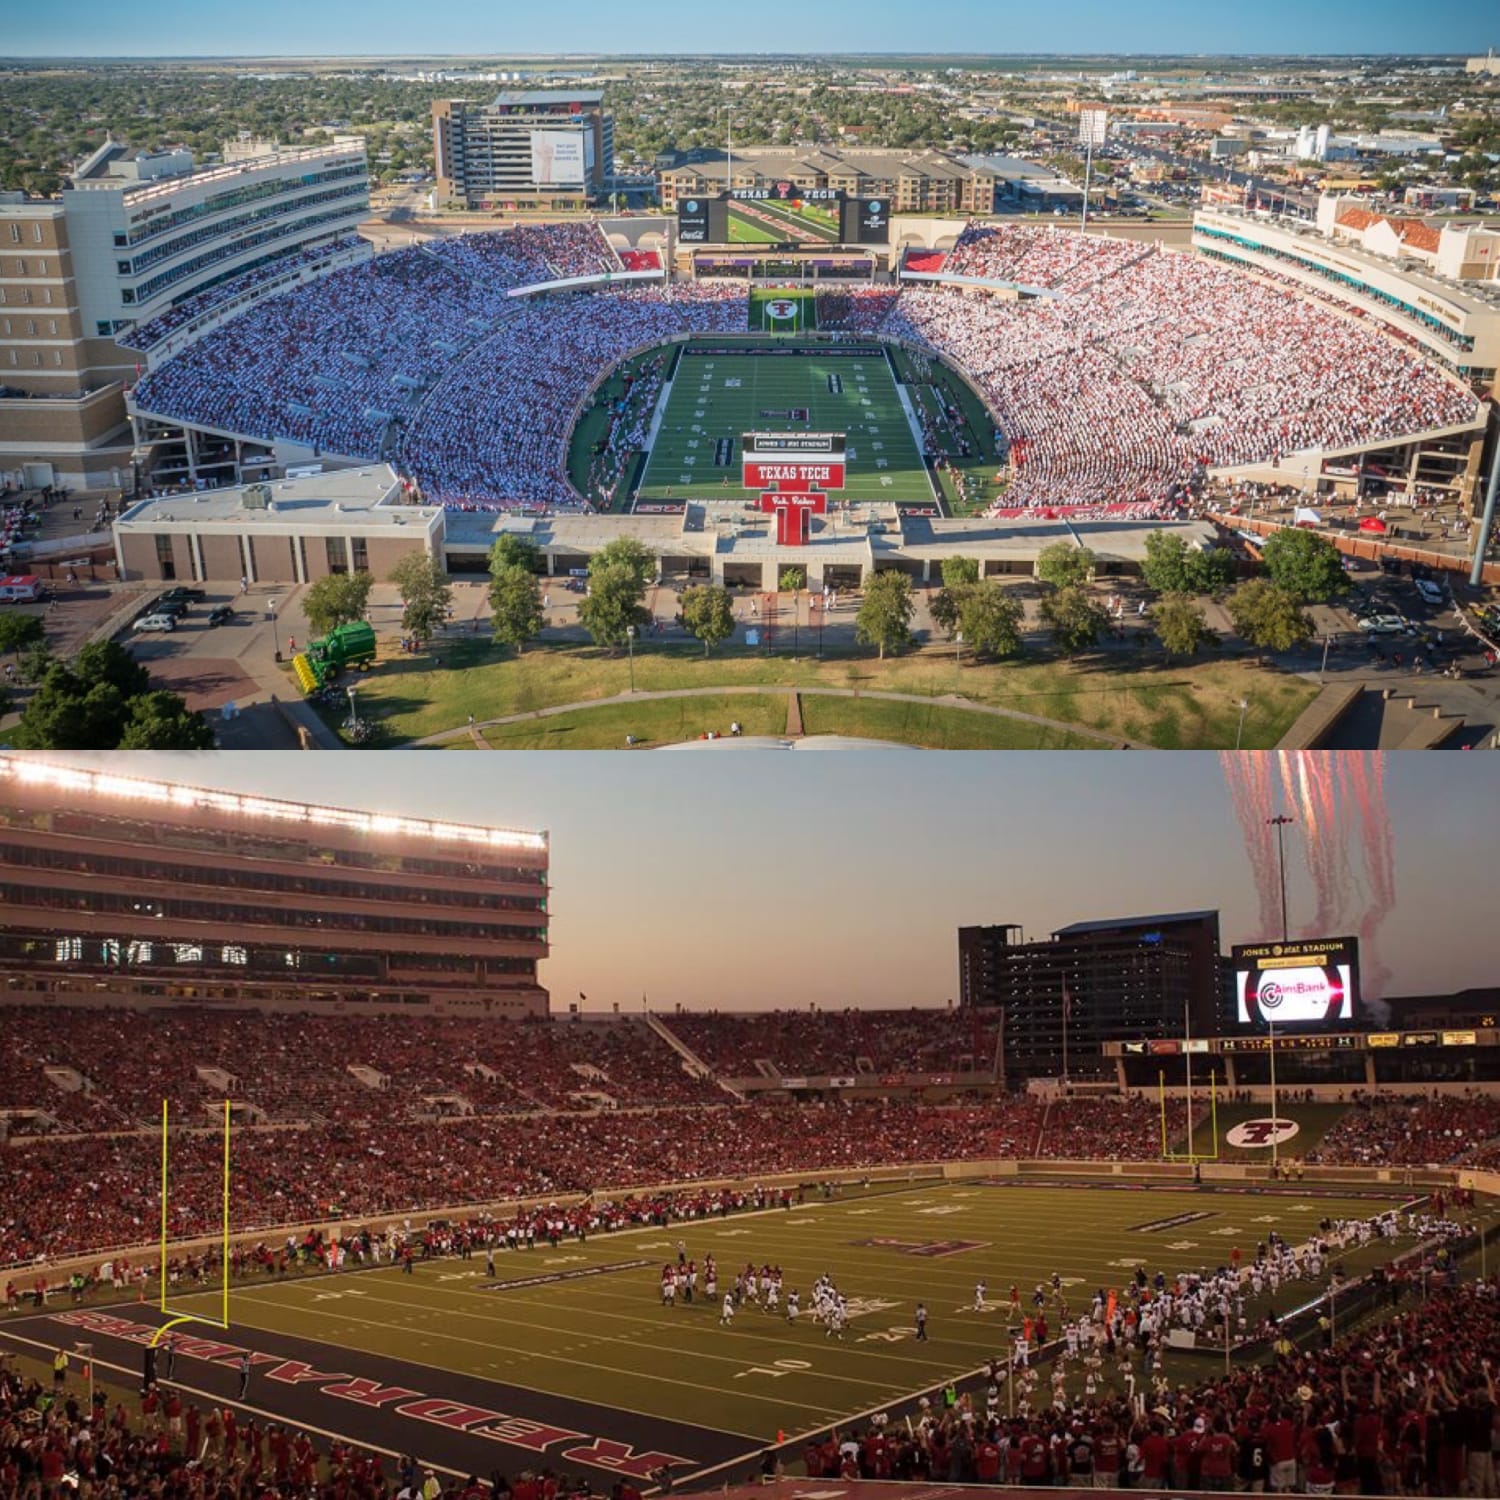 Where the (new) Big 12 will play football